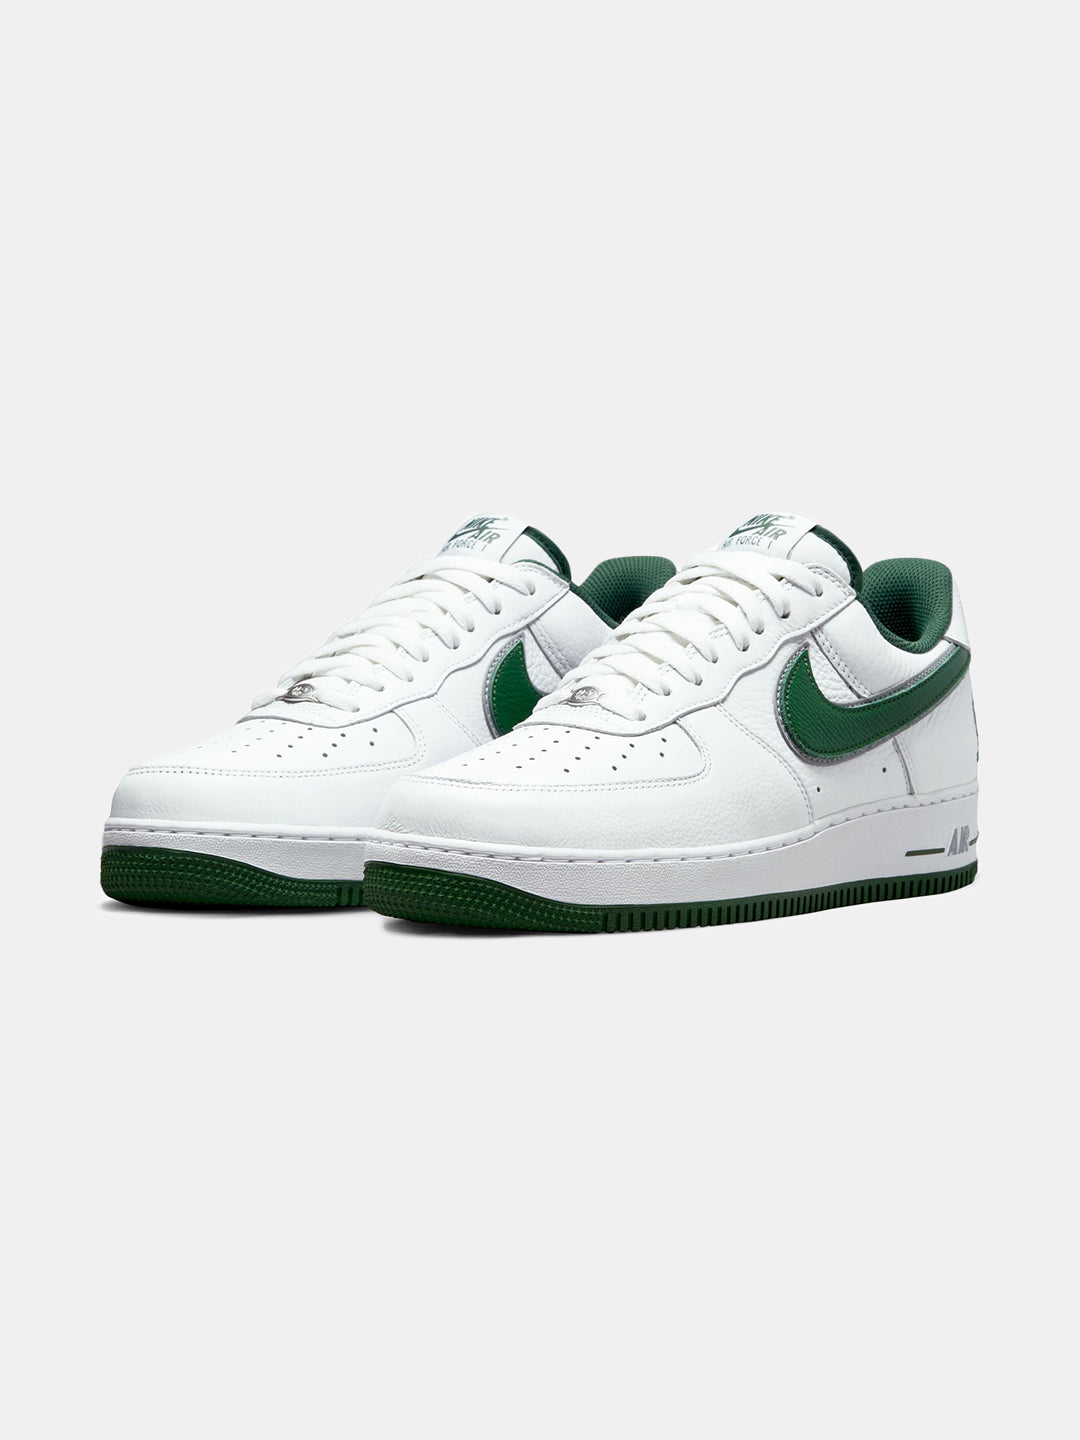 Nike Air Force 1 Low Four Horsemen Shoes - image of the white and green sneakers